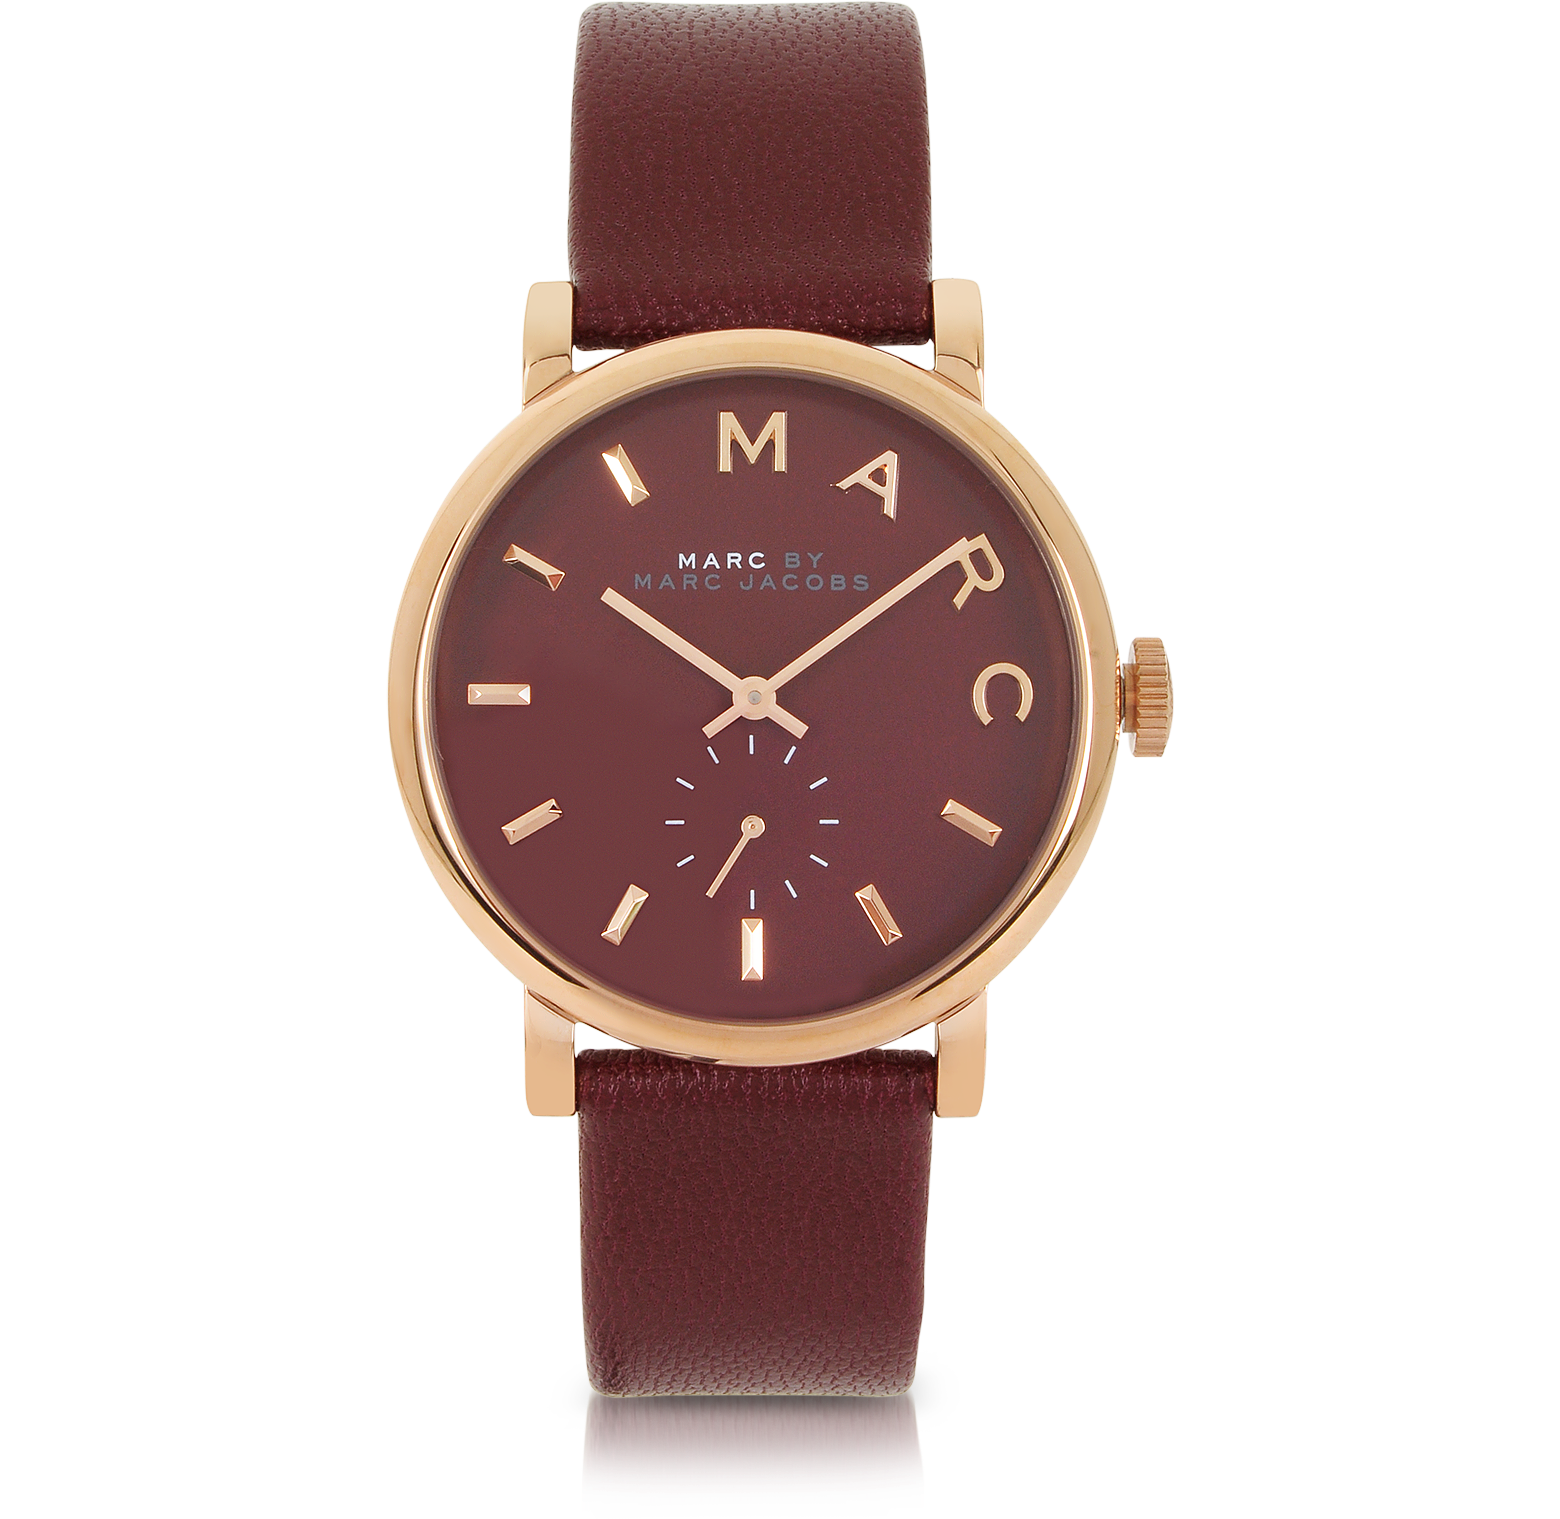 Marc by Marc Jacobs Maroon Baker 36.5MM Round Women's Watch at FORZIERI